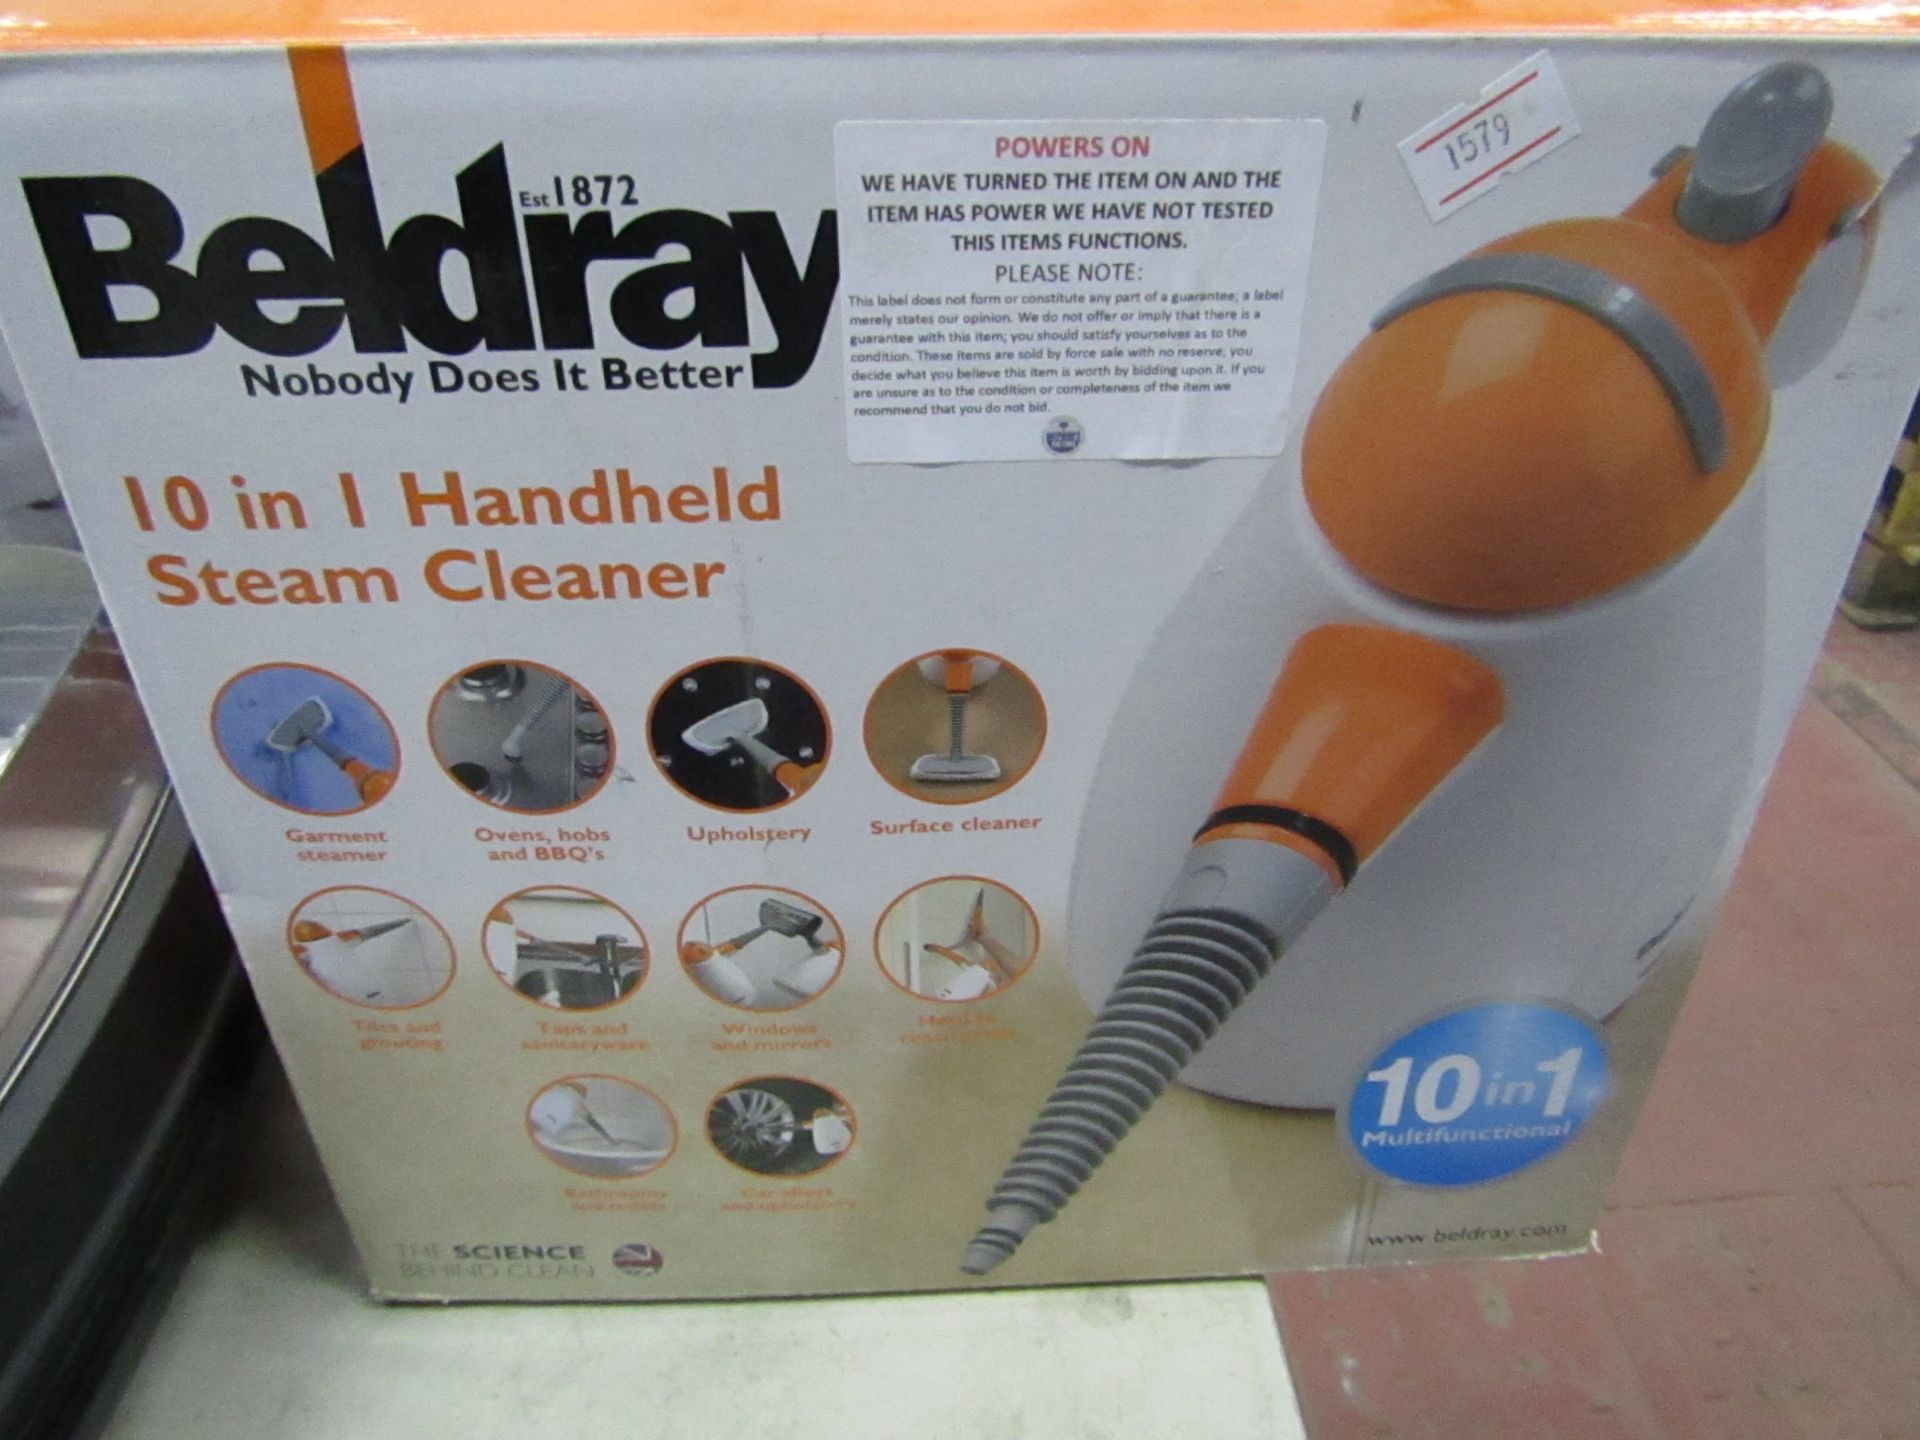 beldray 10 in 1 handled steam cleaner has power not tested fully and boxed